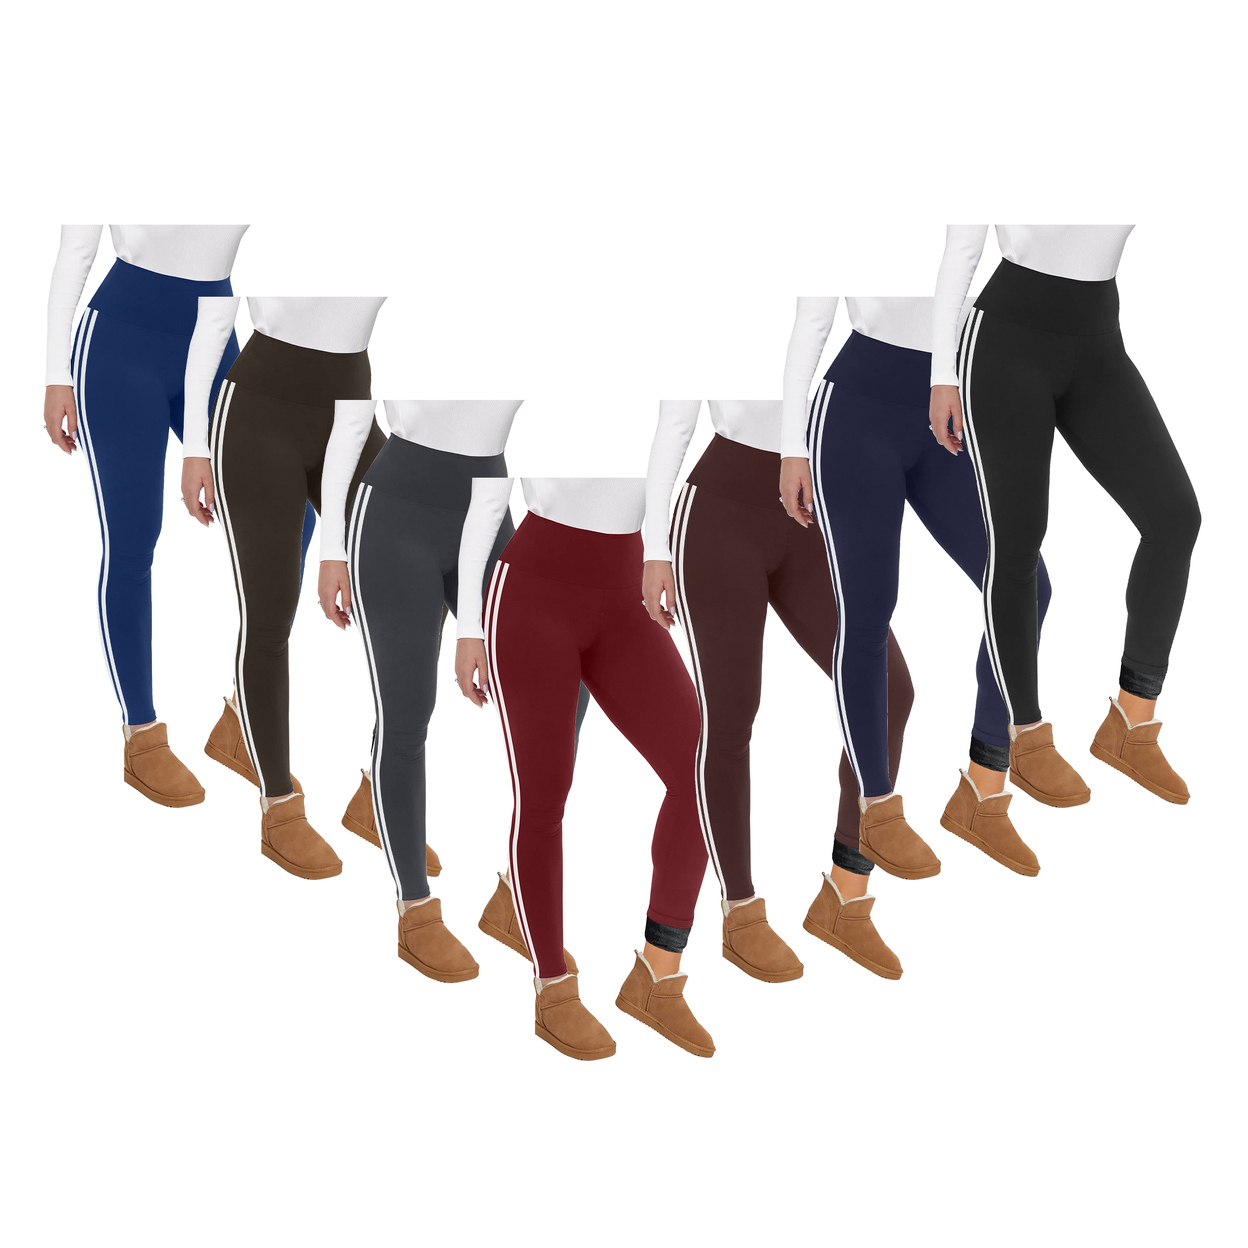 Multi-Pack: Women's Ultra Soft Winter Warm Cozy Striped Fur Lined Yoga Leggings - 3-pack, Assorted, Small